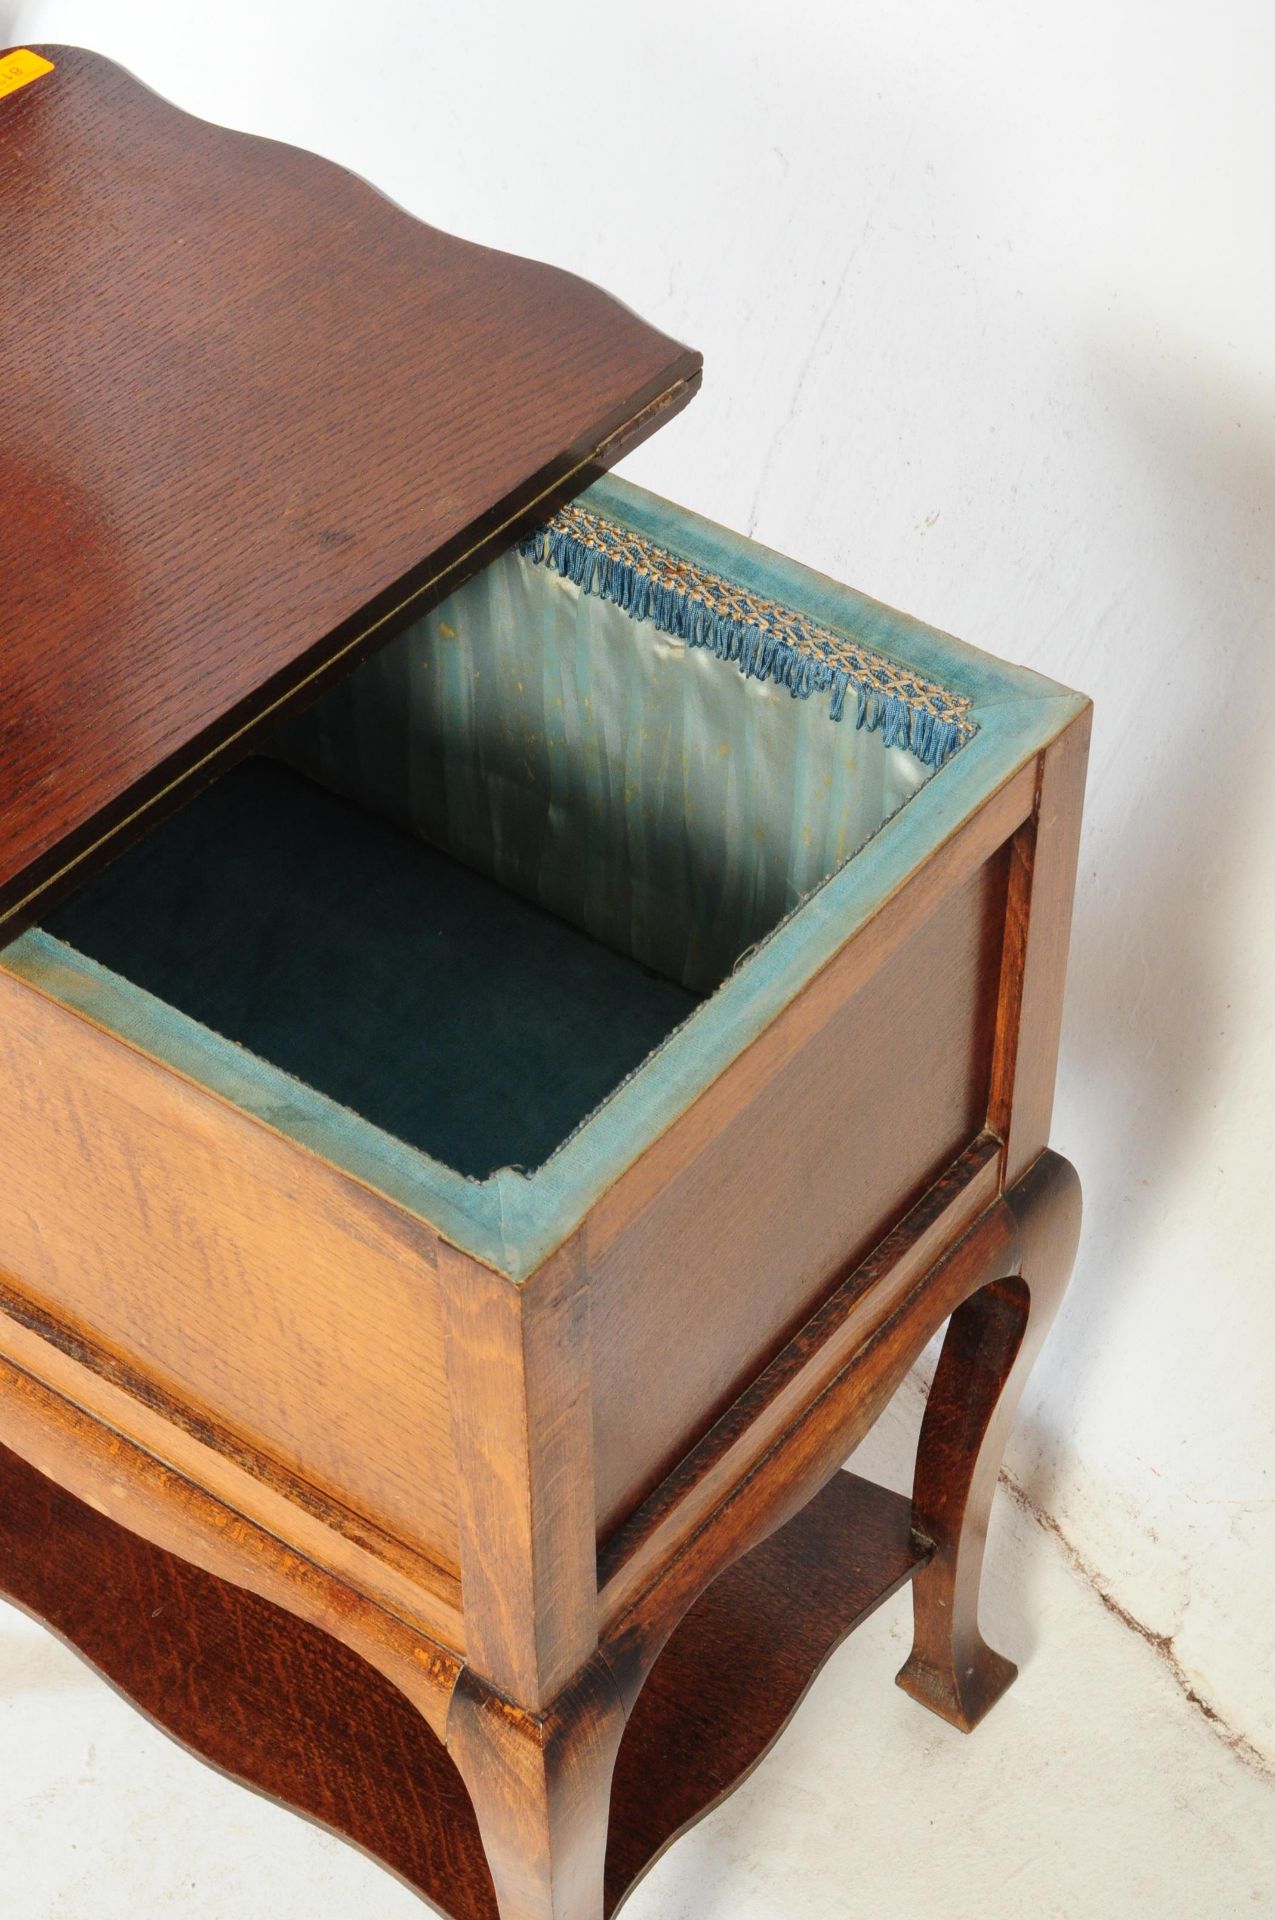 AN ART DECO 1930'S MORCO PRODUCT OAK SEWING BOX / CARD TABLE - Image 3 of 4